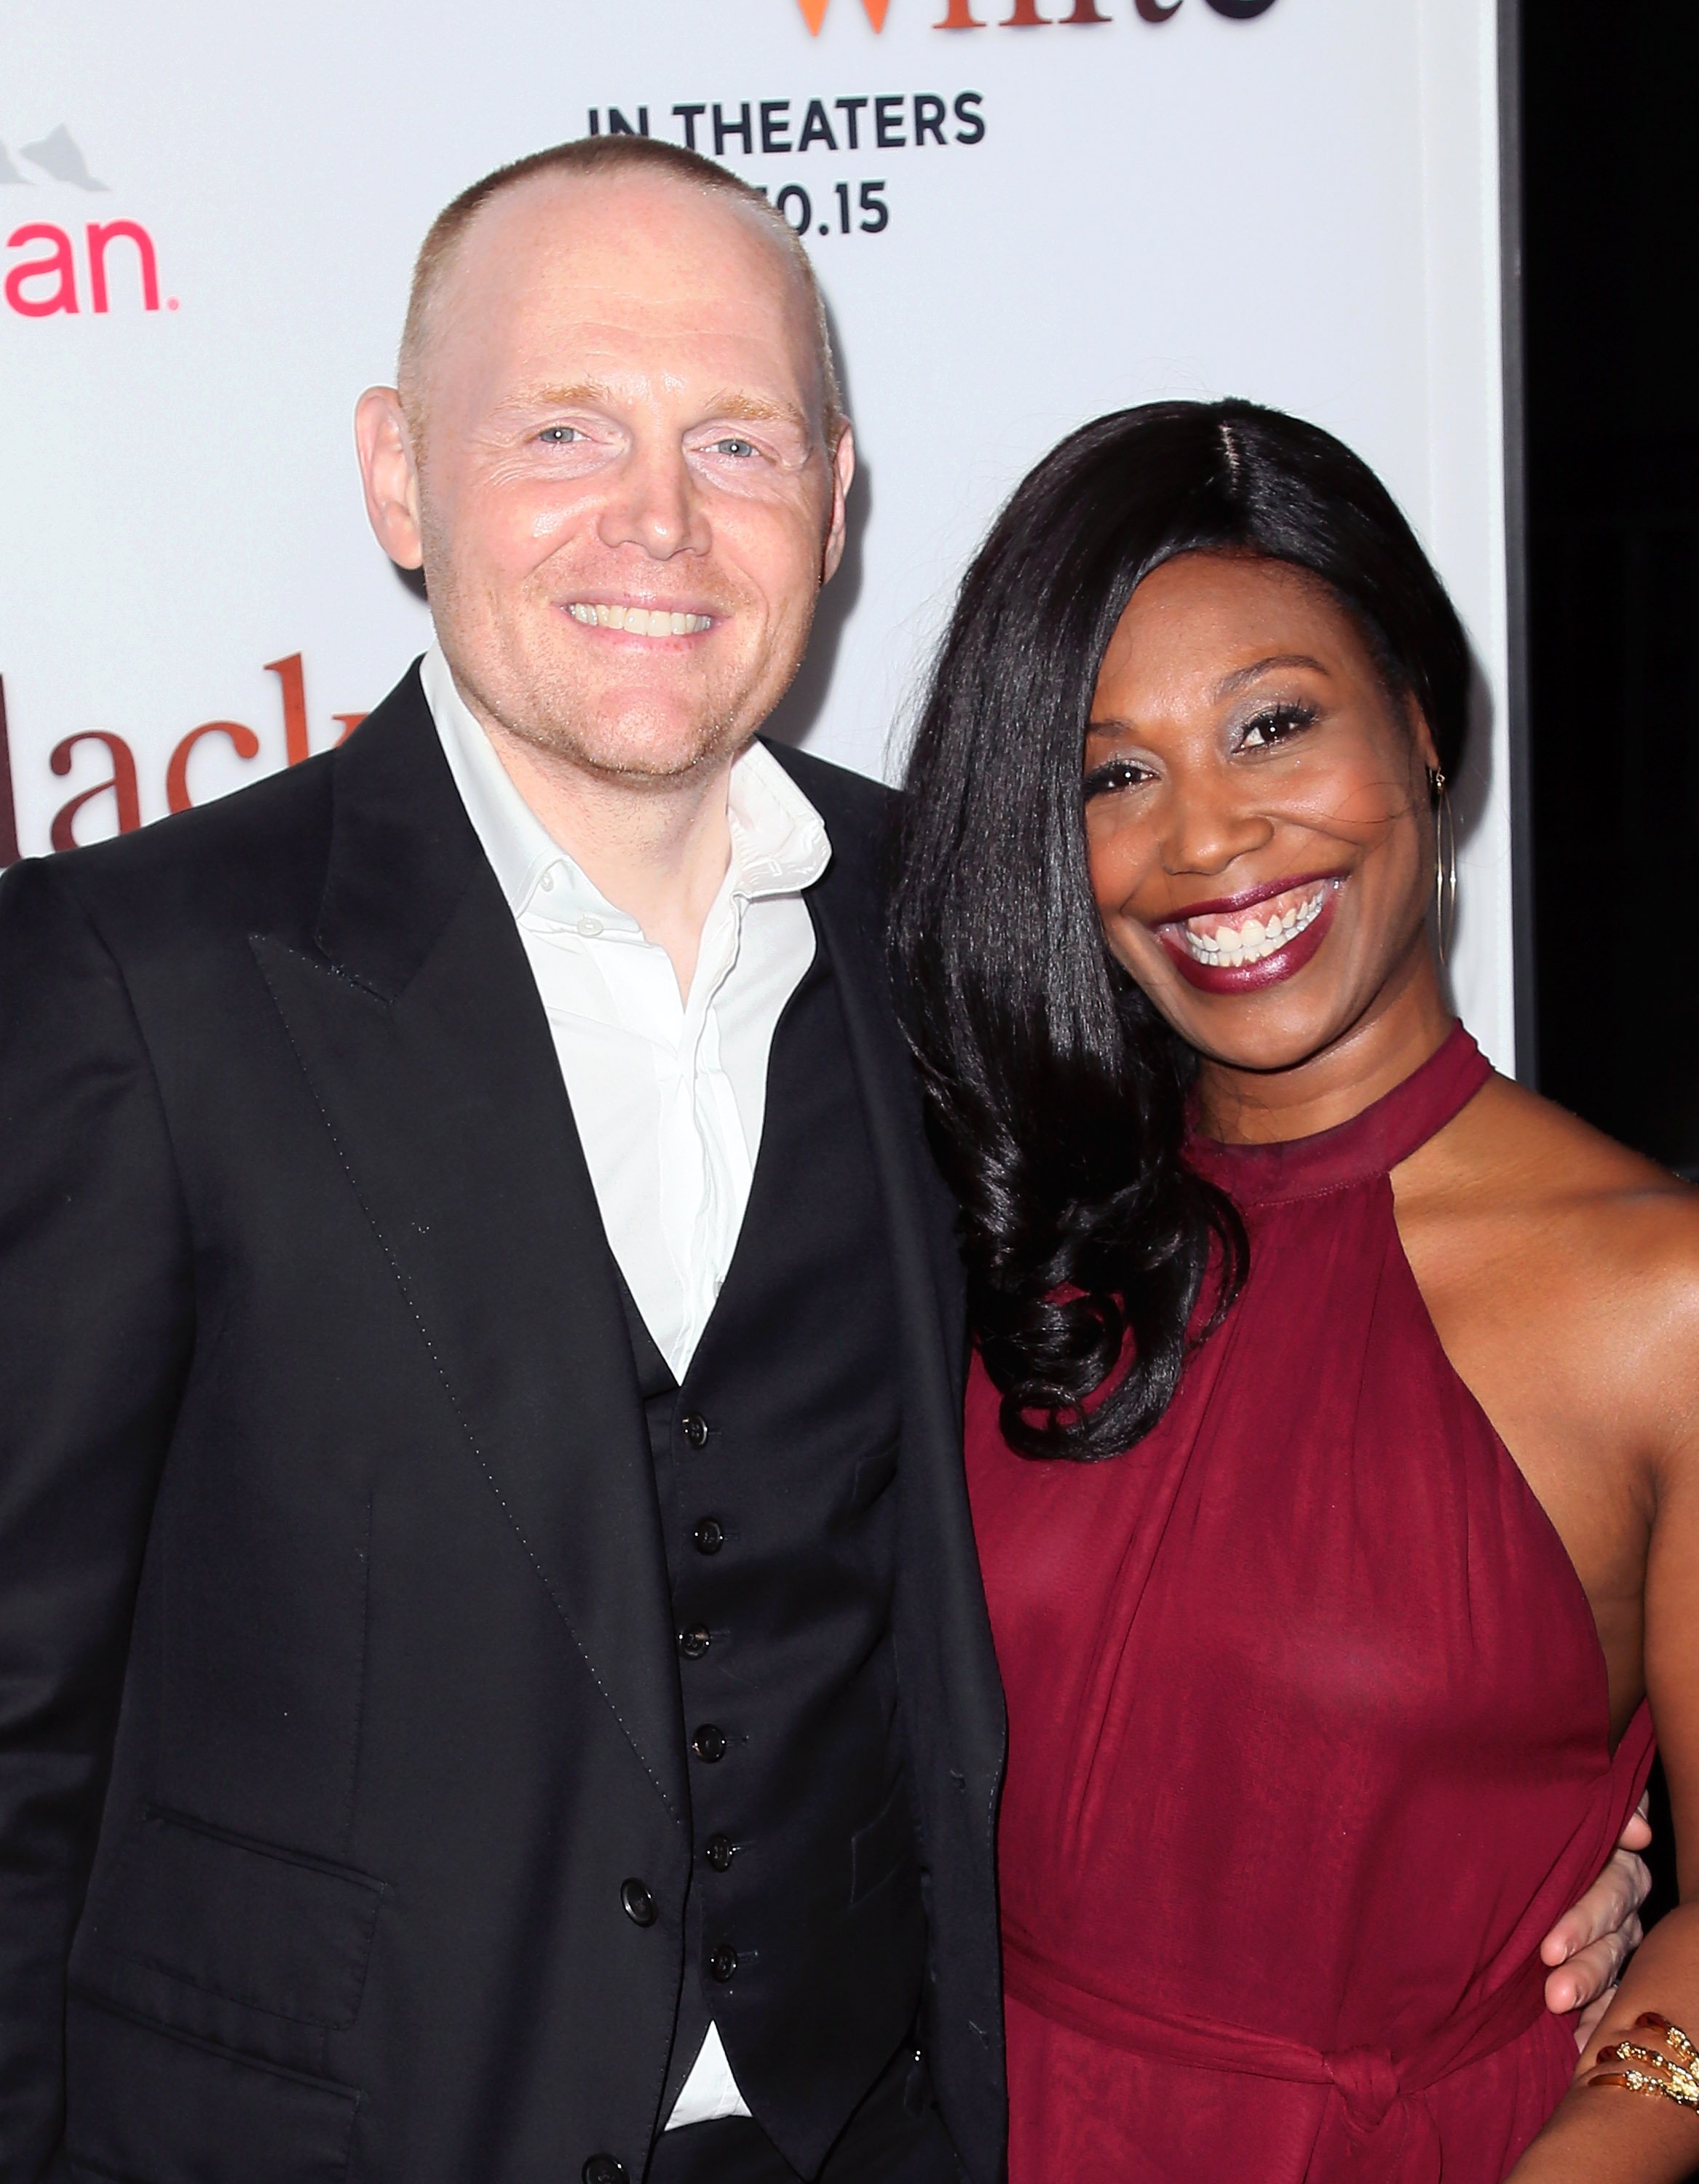 Bill Burr and Nia Renee Hill attend the premiere of Relativity Media's "Black or White" at Regal Cinemas L.A. Live on January 20, 2015, in Los Angeles, California | Source: Getty Images